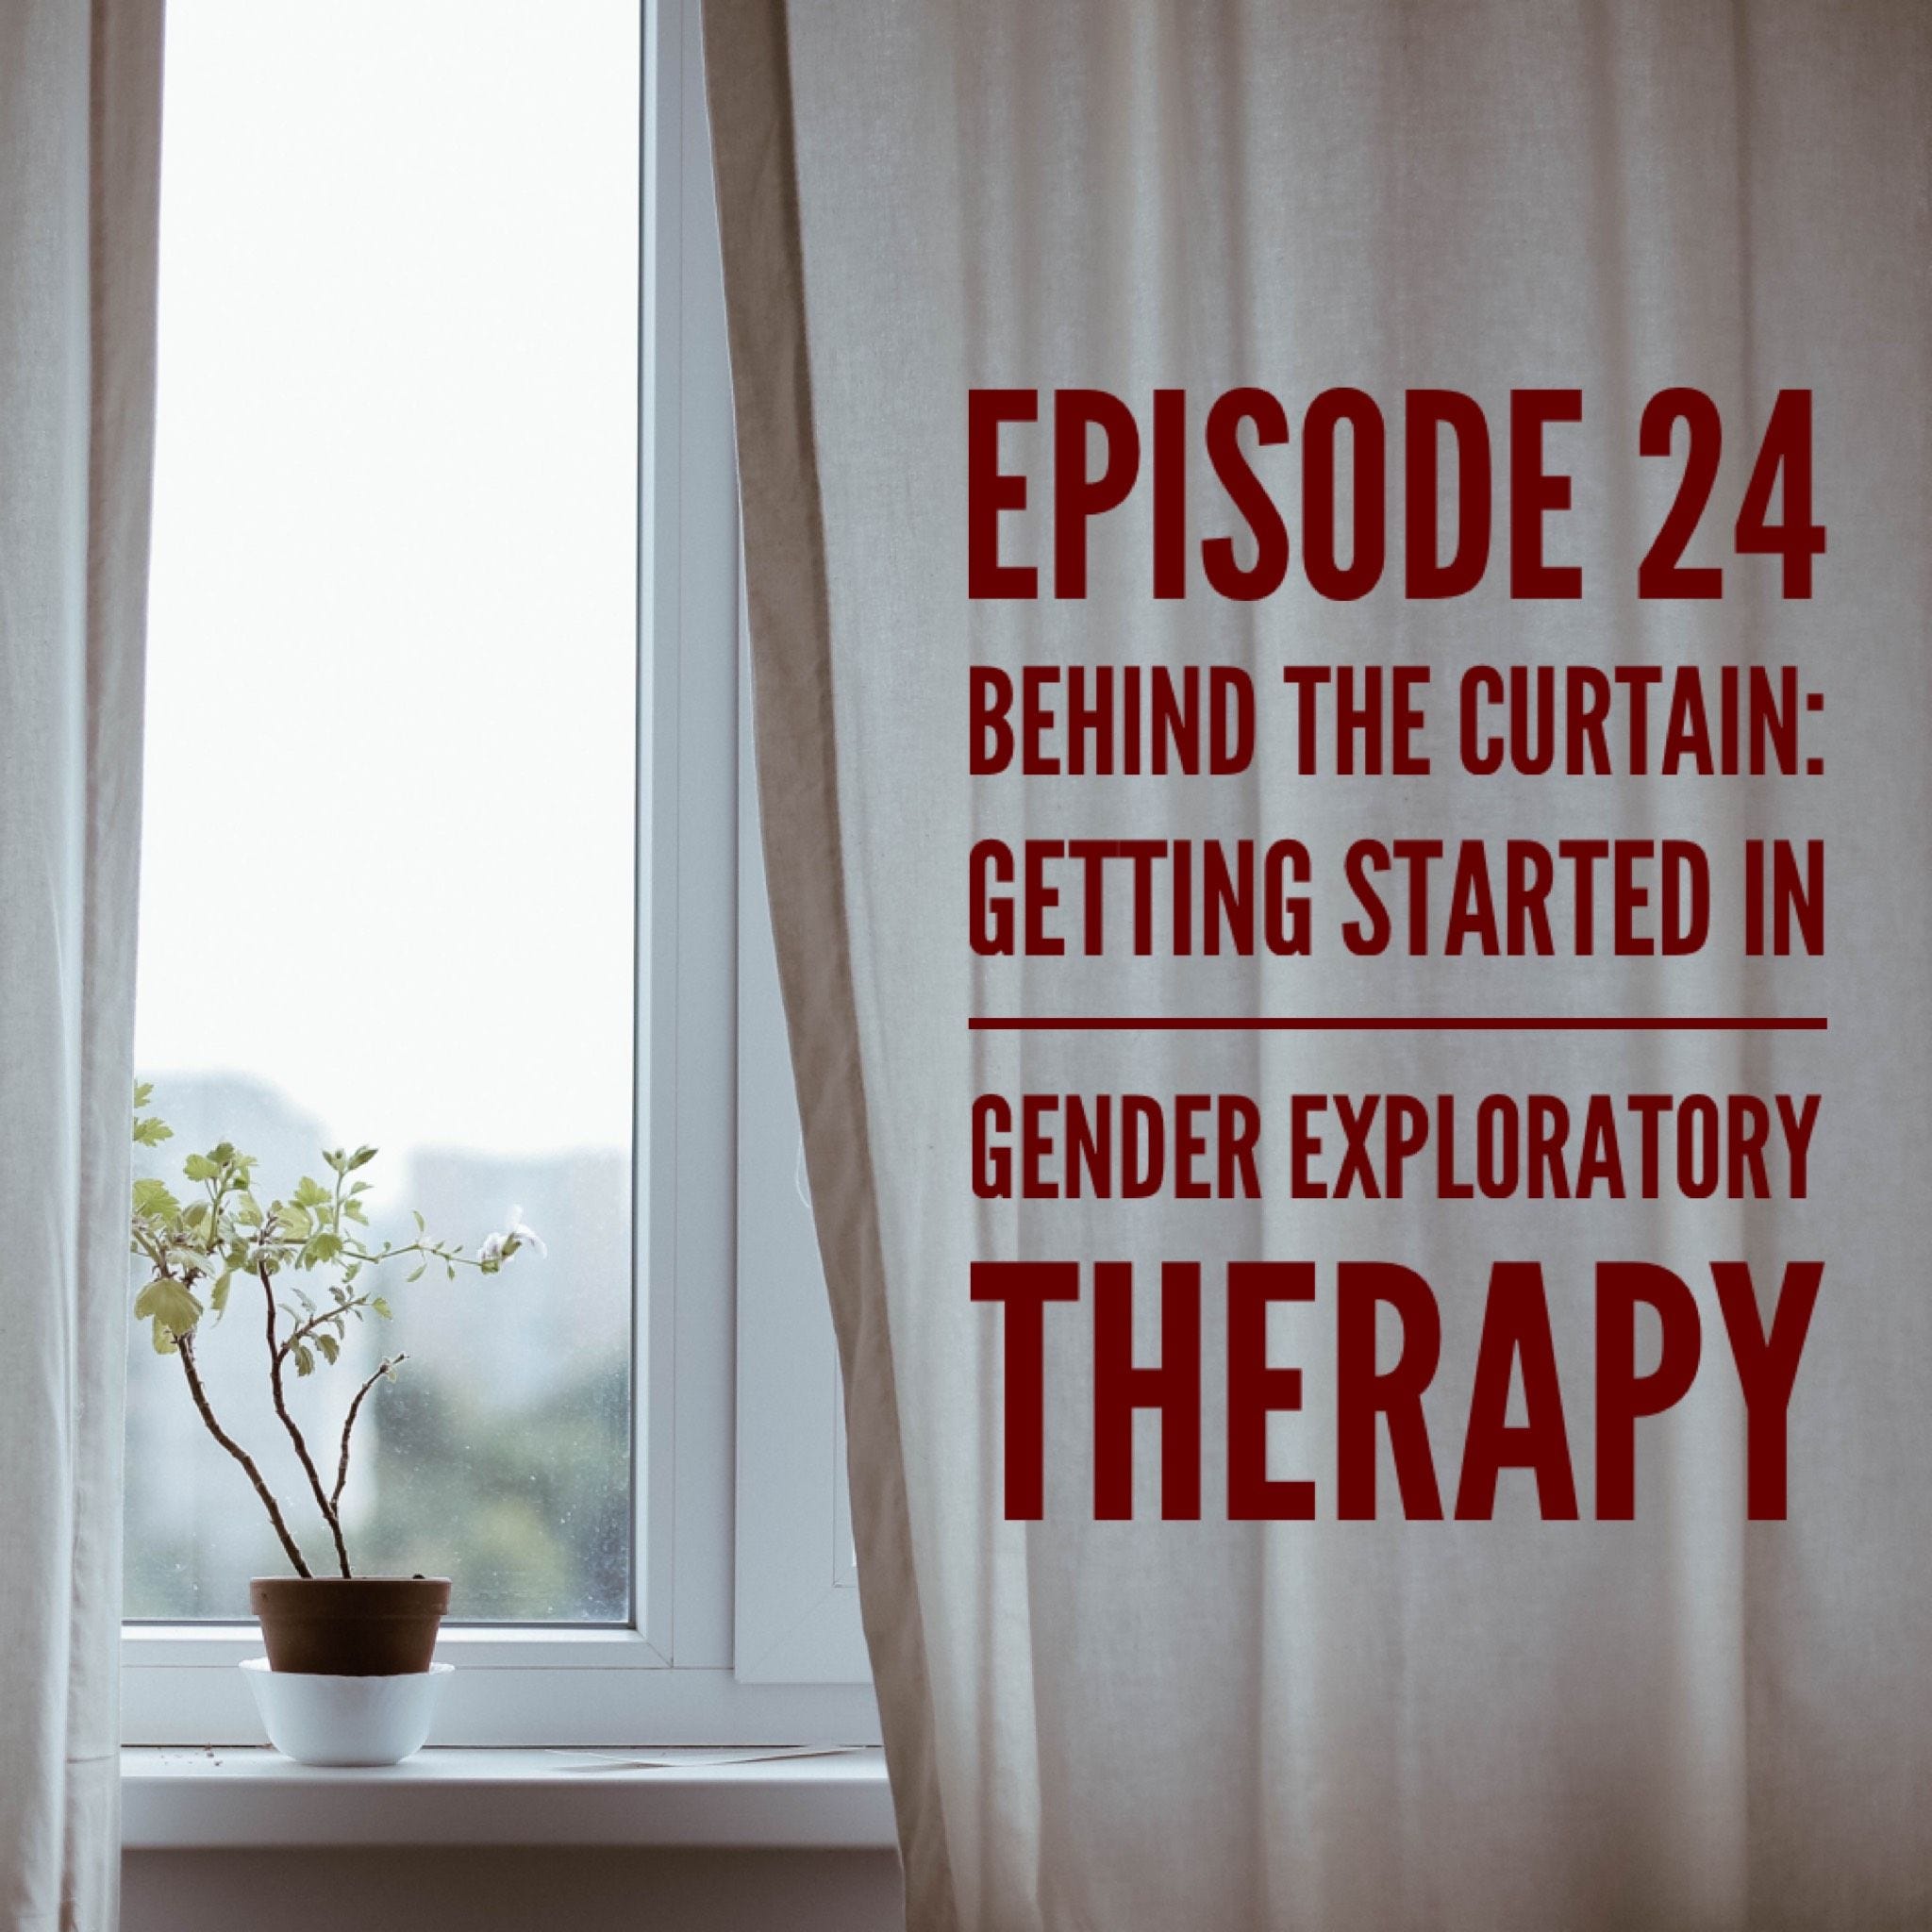 24 - Behind the Curtain: Getting Started In Gender Exploratory Therapy